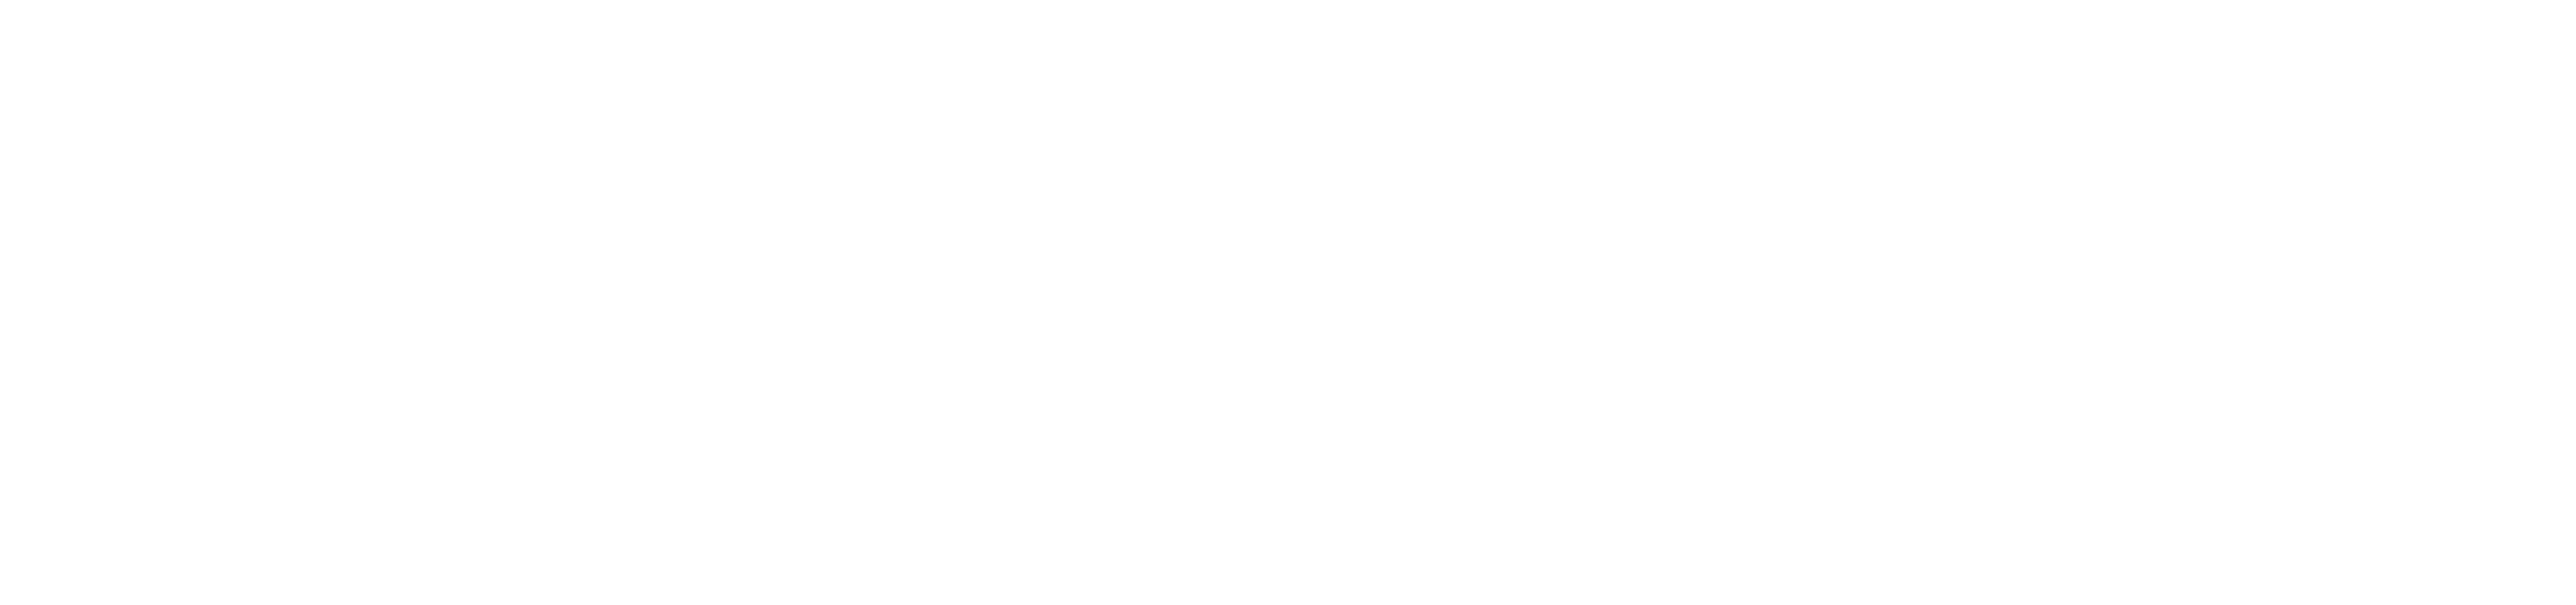 Fornybar Norges logo